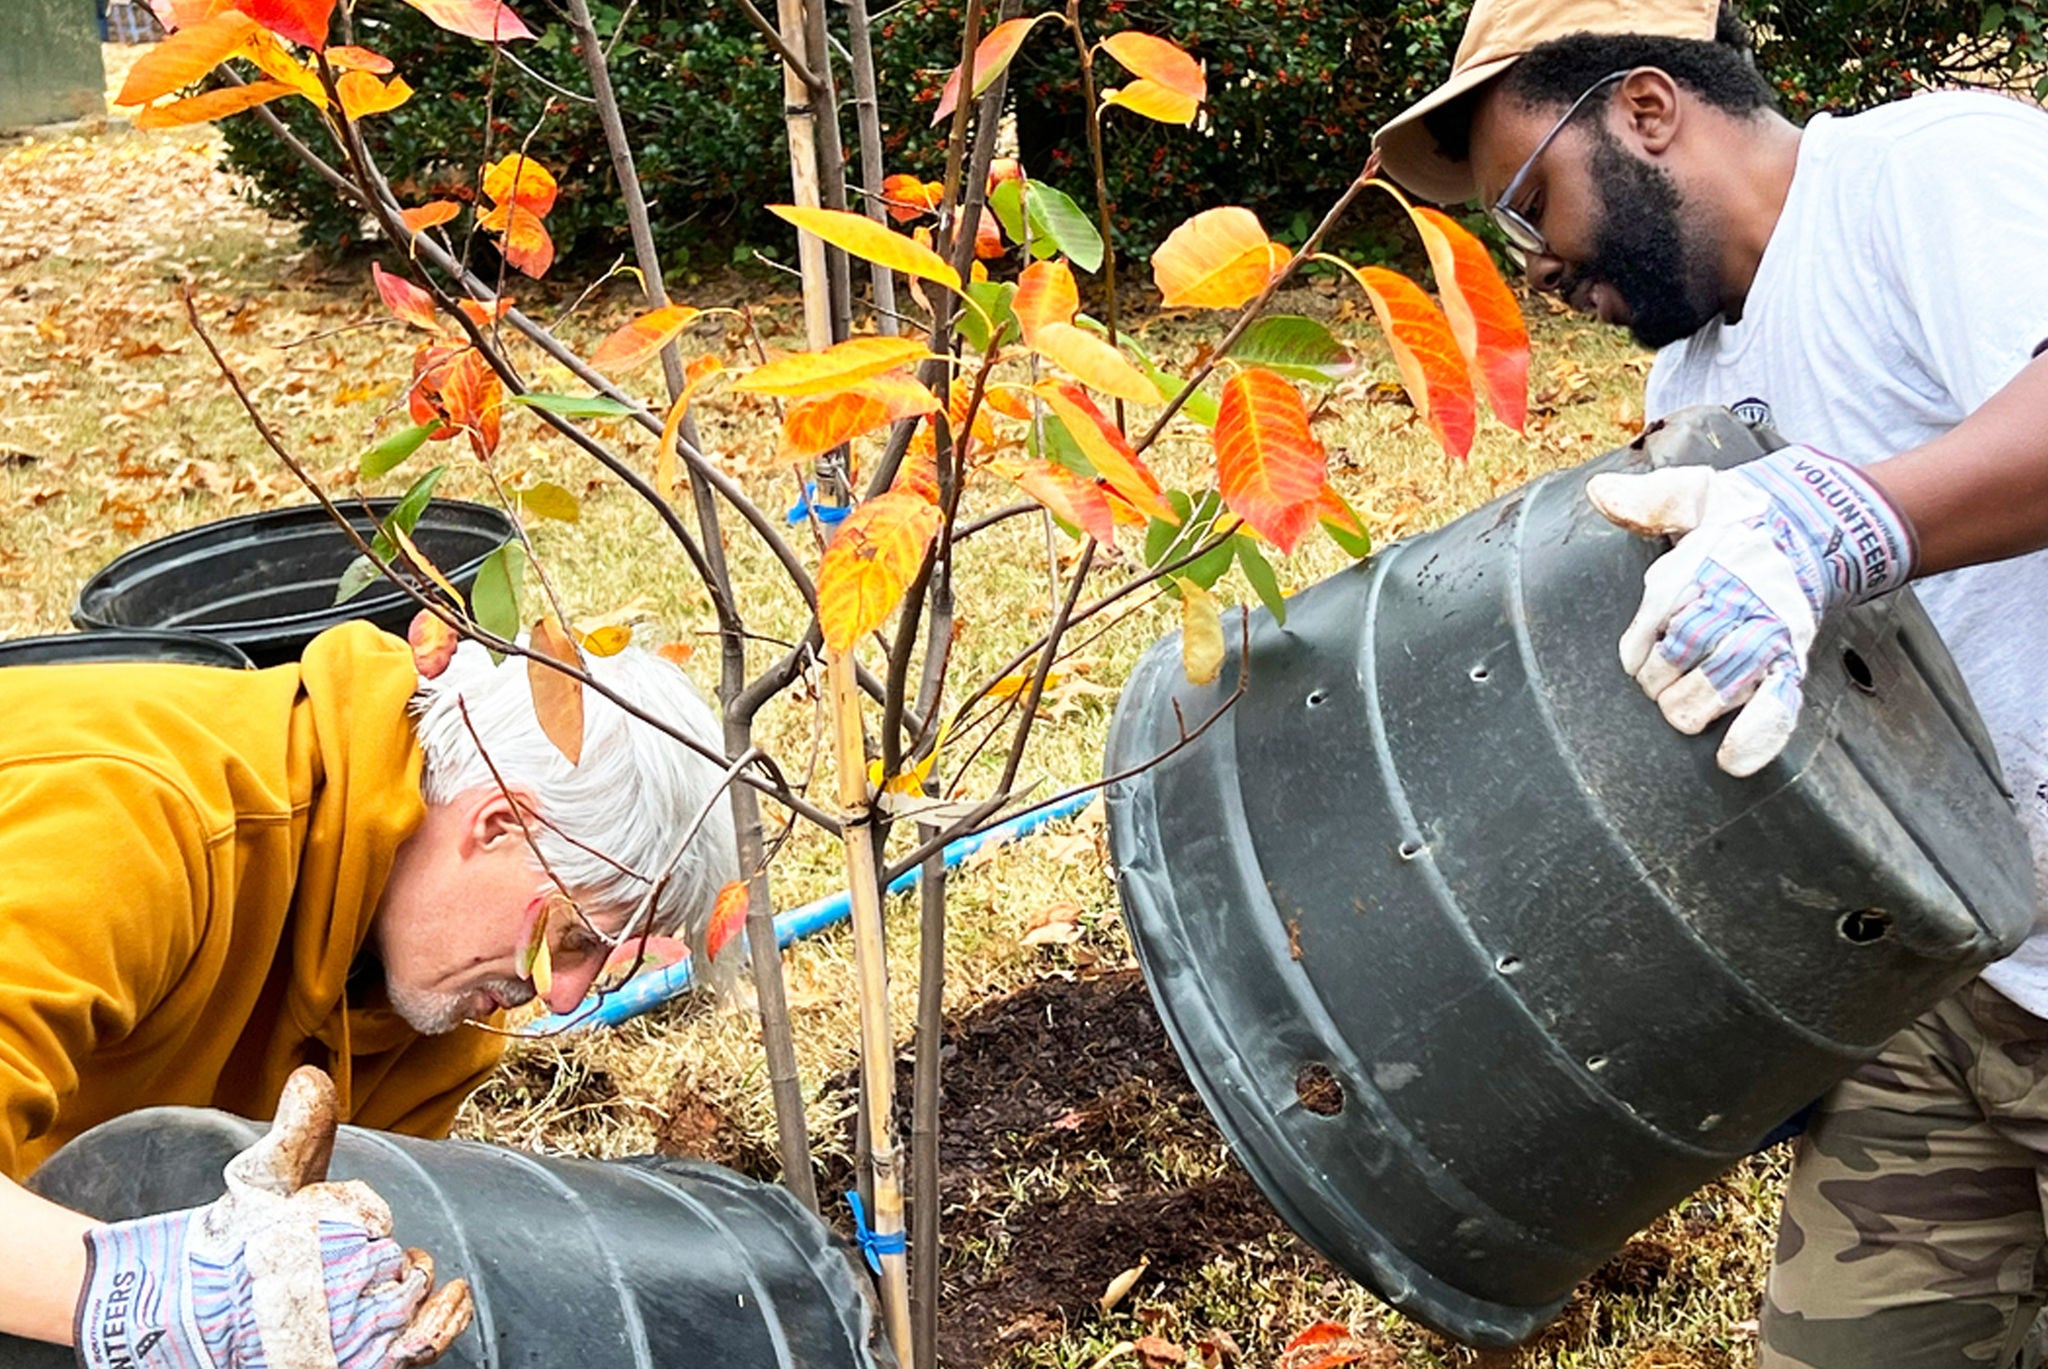 Two railroad industry employees planting a tree, fostering sustainability and growth in your community